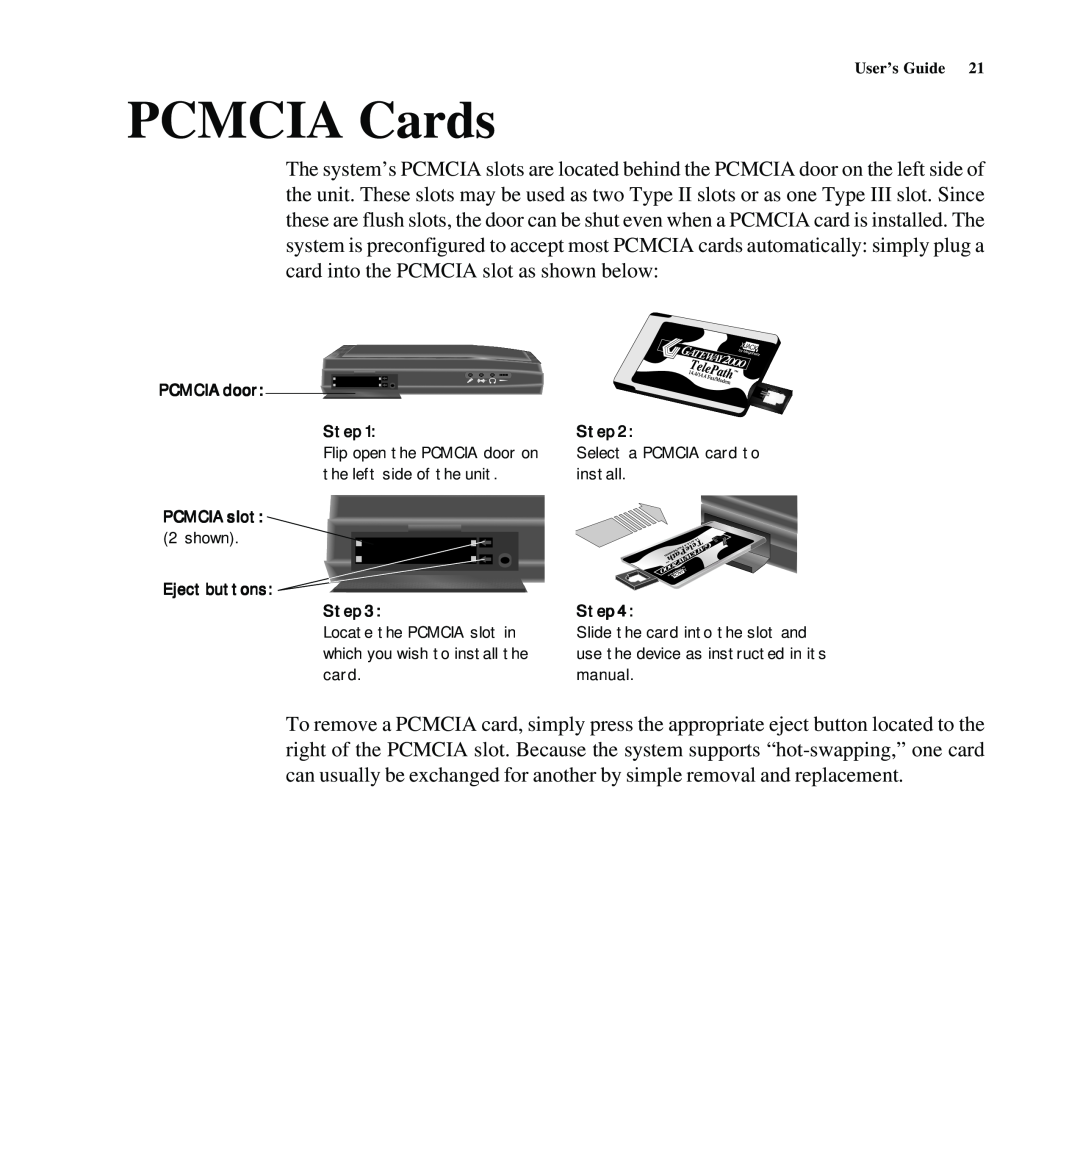 Gateway SYSMAN017AAUS manual PCMCIA Cards, Flip open the PCMCIA door on the left side of the unit, shown 